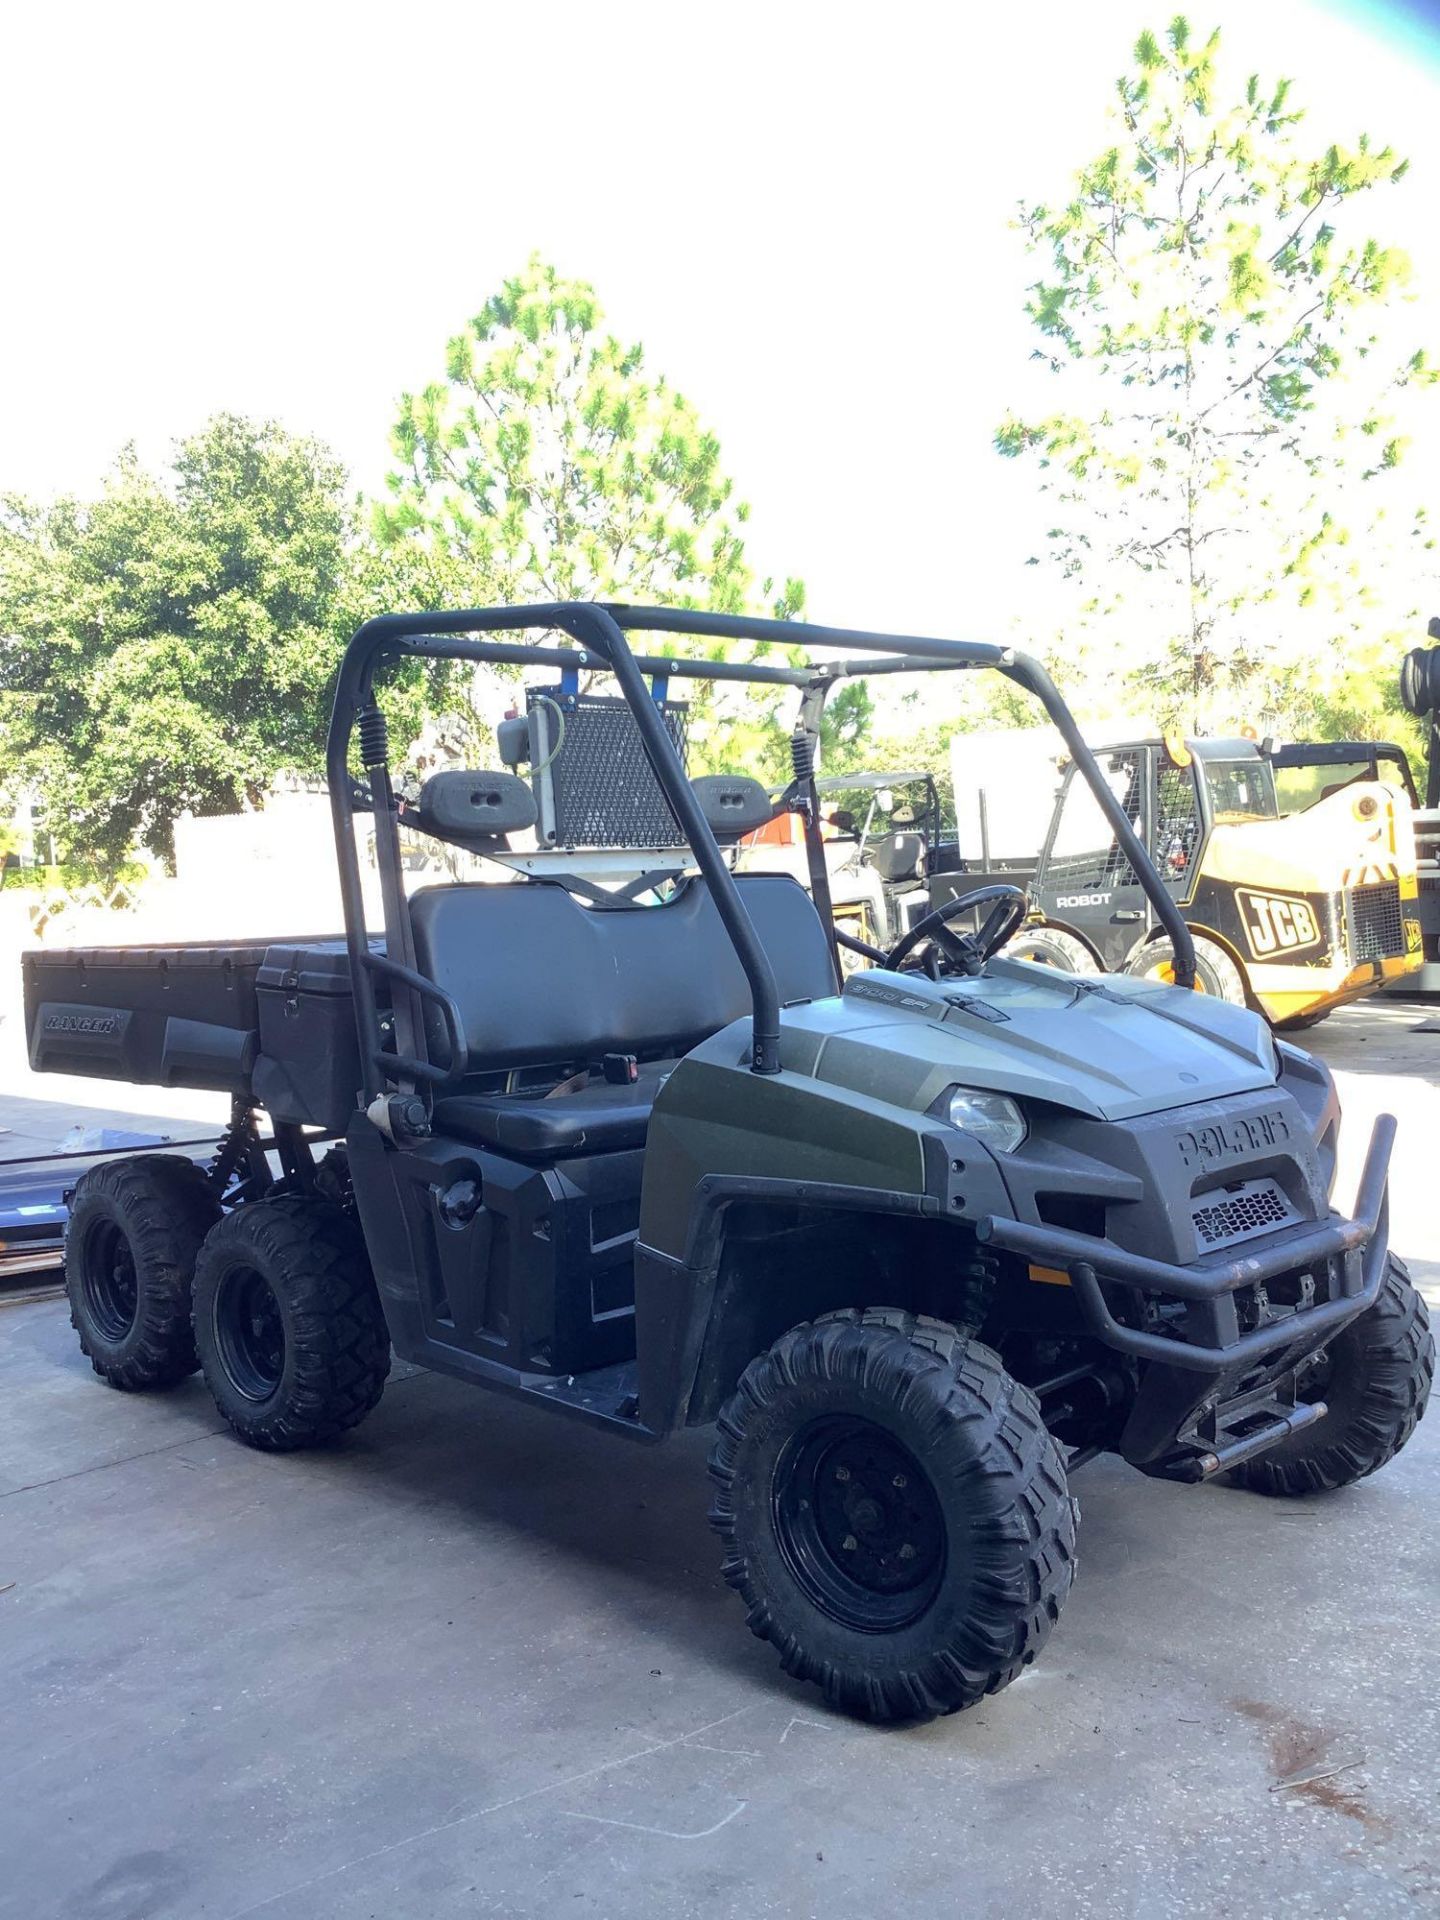 2011 POLARIS 6x6 RANGER 700, GAS POWERED, AWD, AUTOMATIC DUMP BED, STORAGE BOX APPROX 5FT LONG, HITC - Image 4 of 23